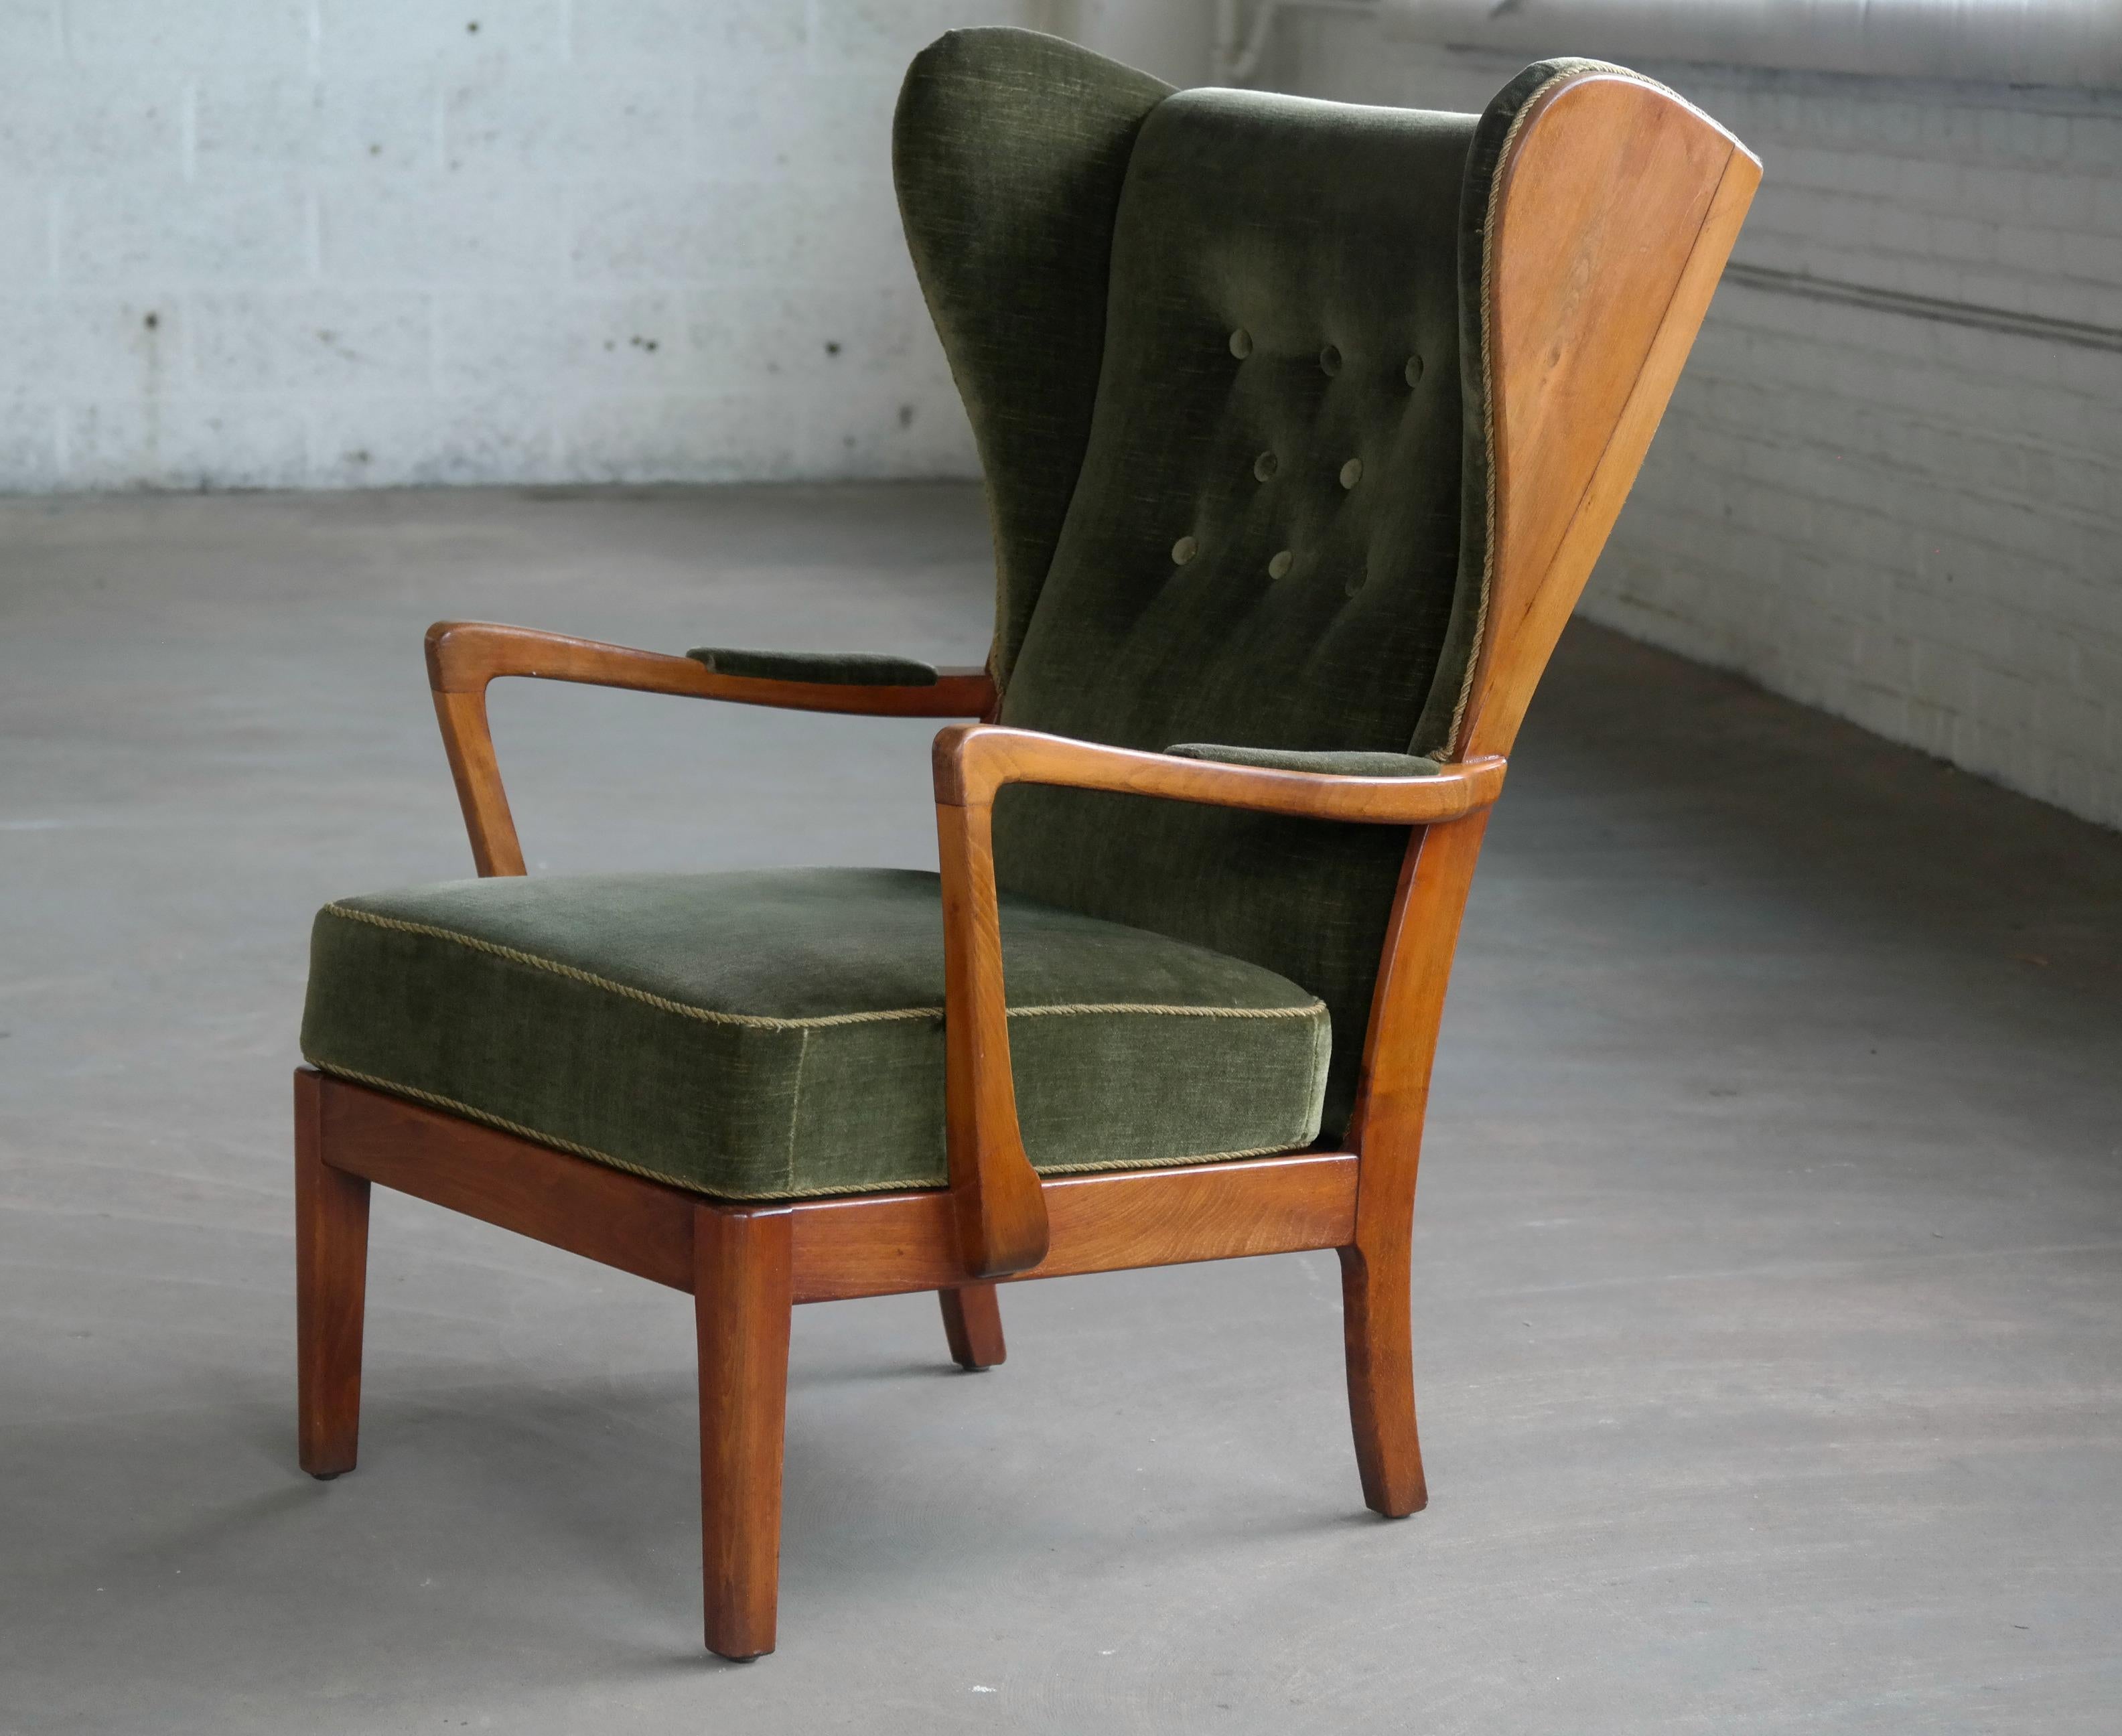 This great elegant chair is in Denmark known as the 